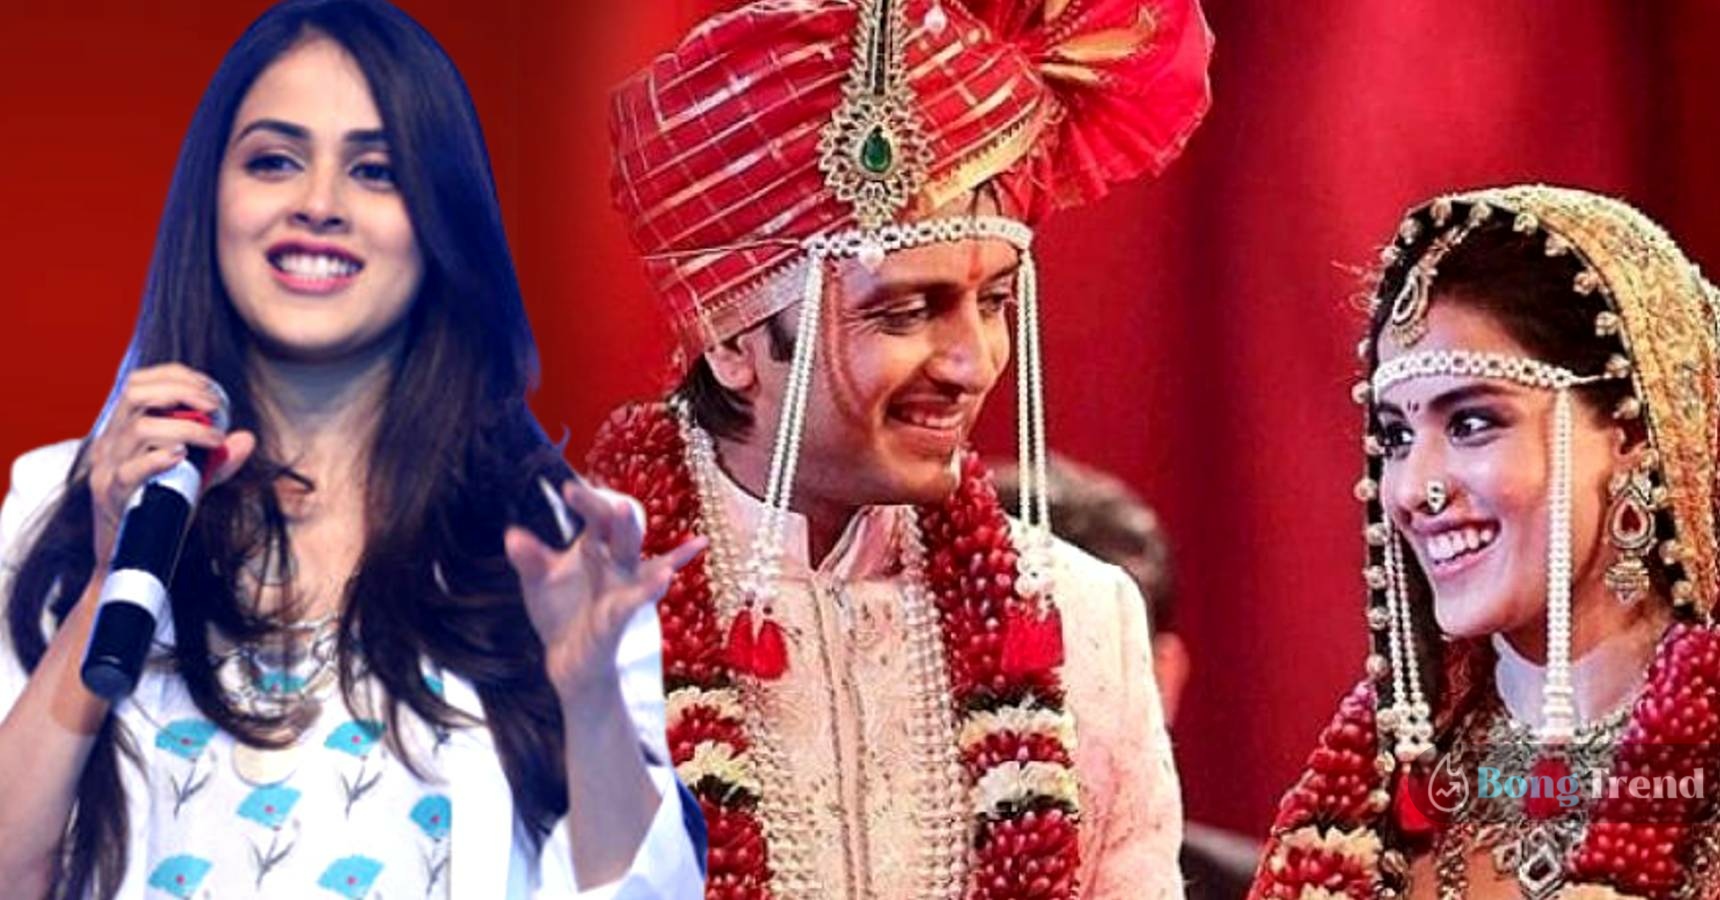 Genelia D’Souza talks about her marriage with Riteish Deshmukh